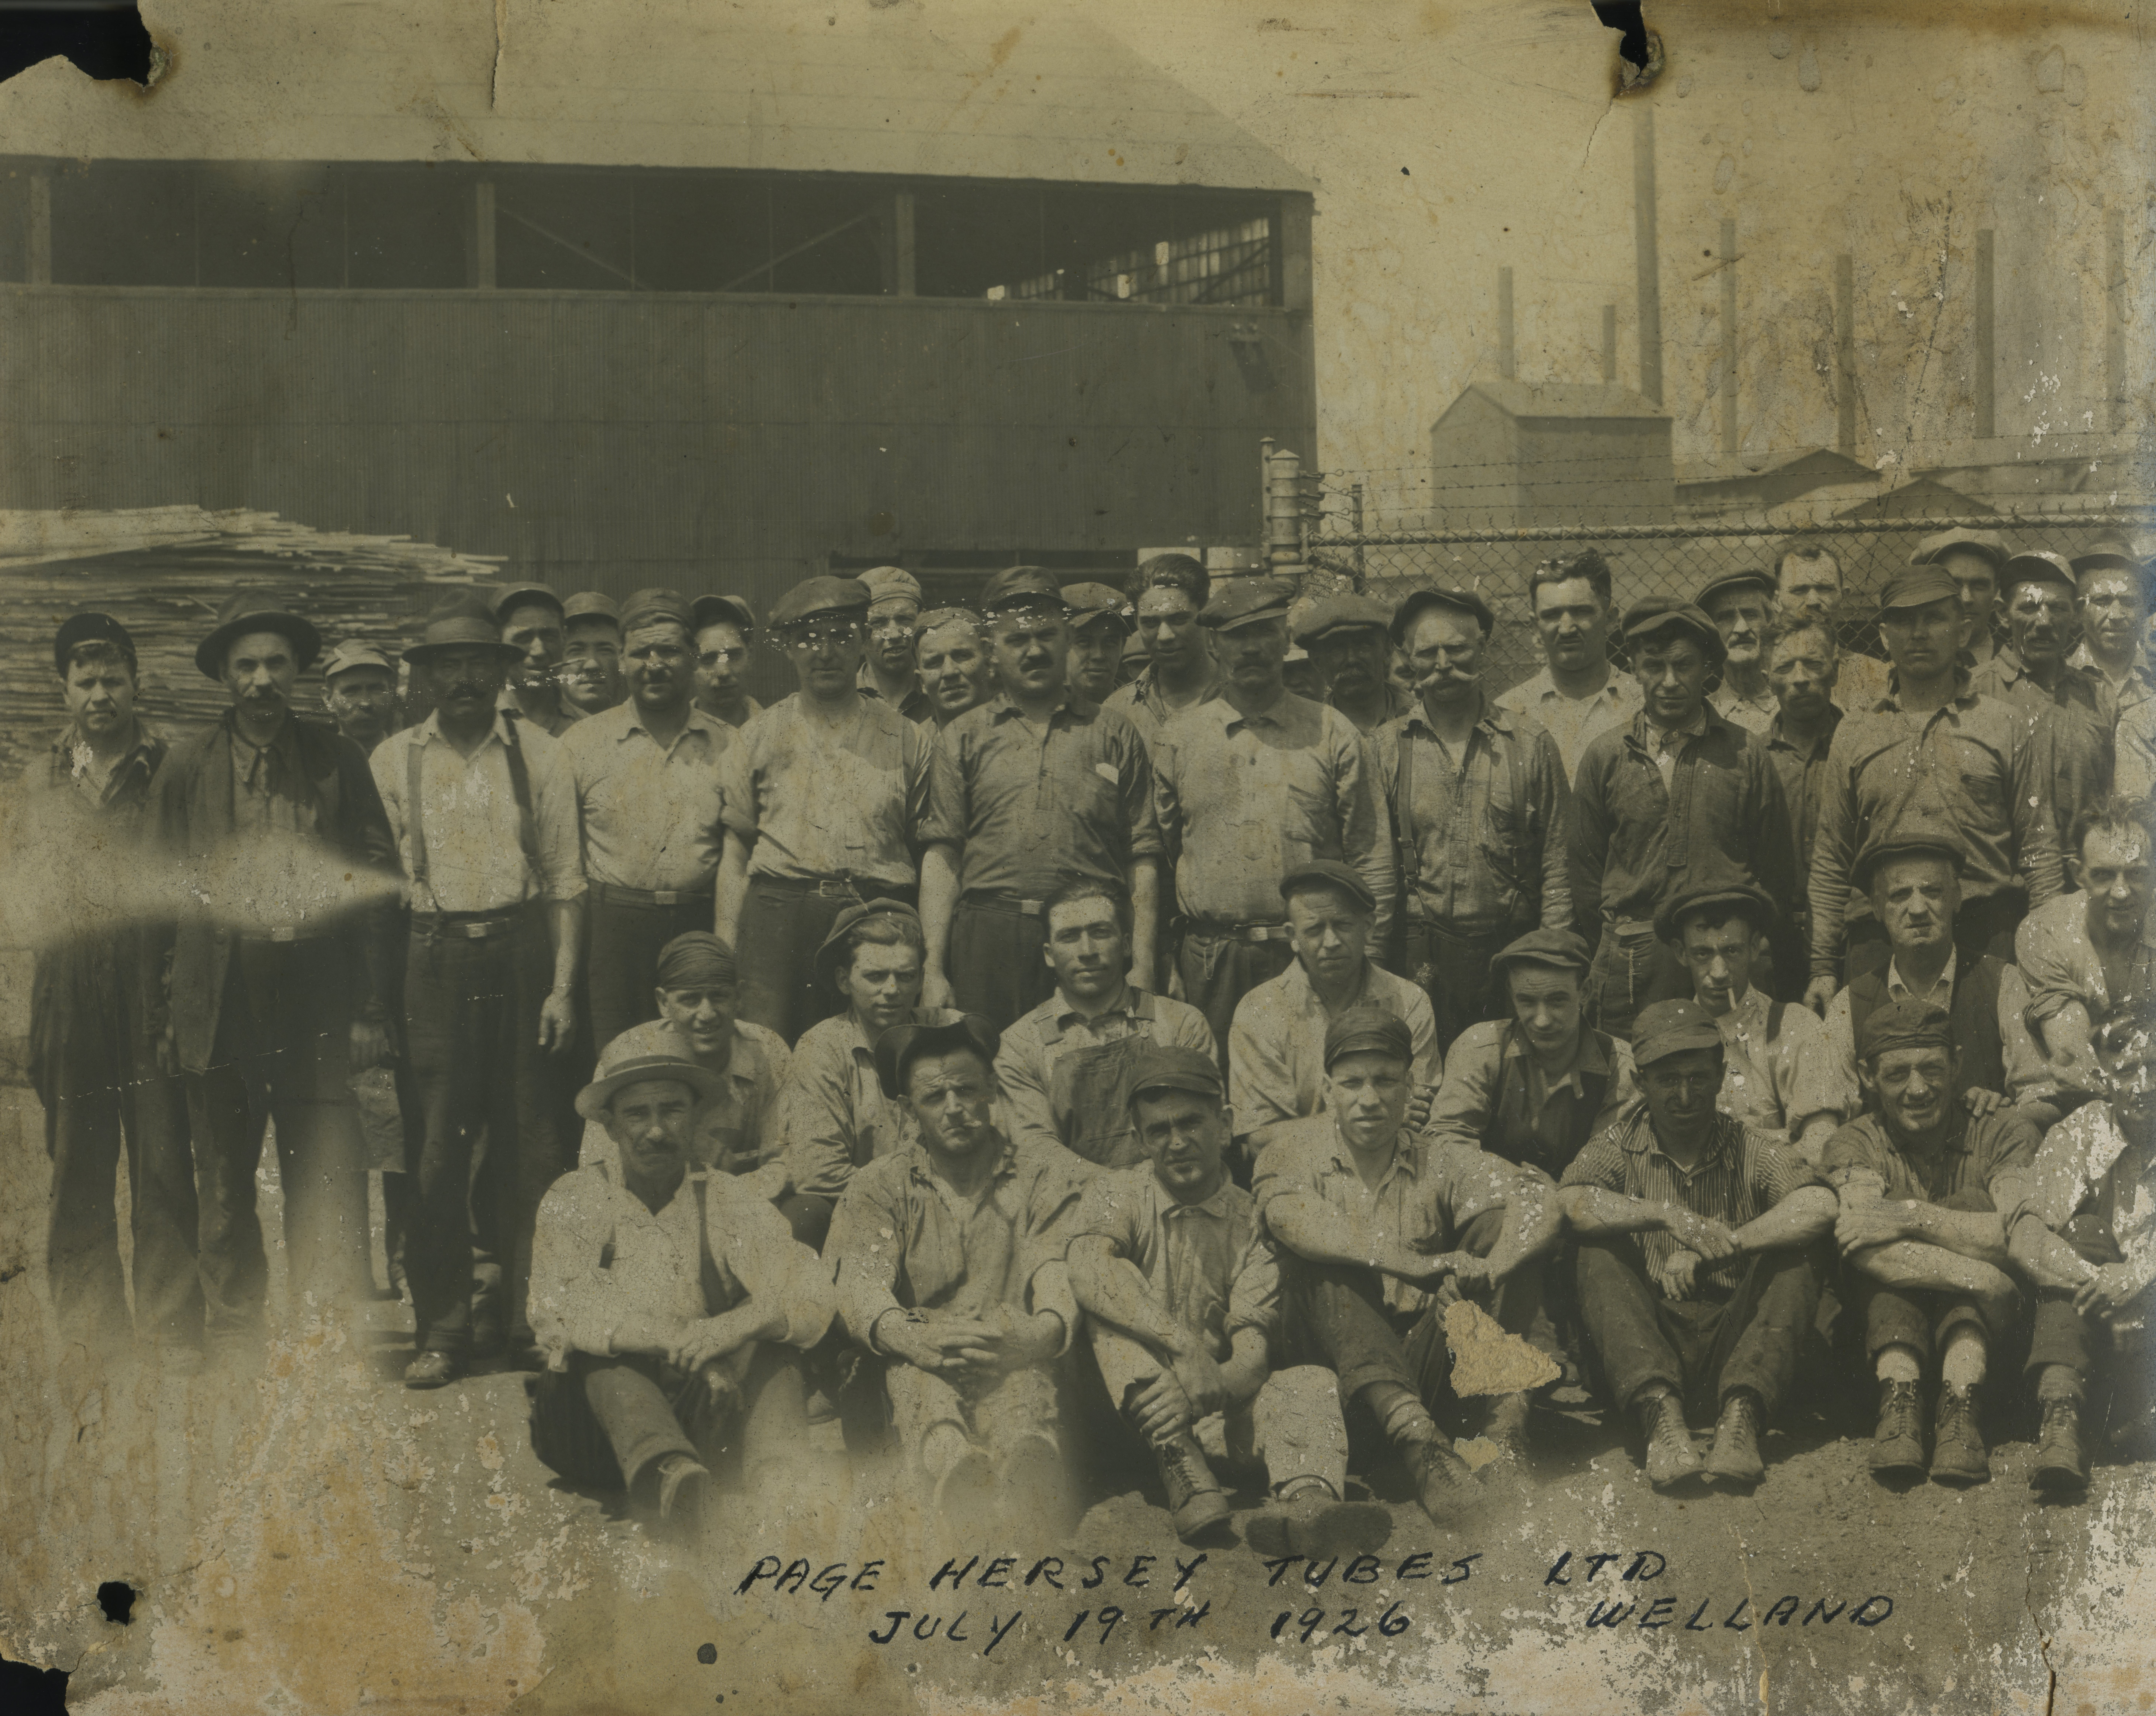 Several rows of men pose for a picture together. The first two rows are seated, and the photograph is so old that the bottom left corner is faded.